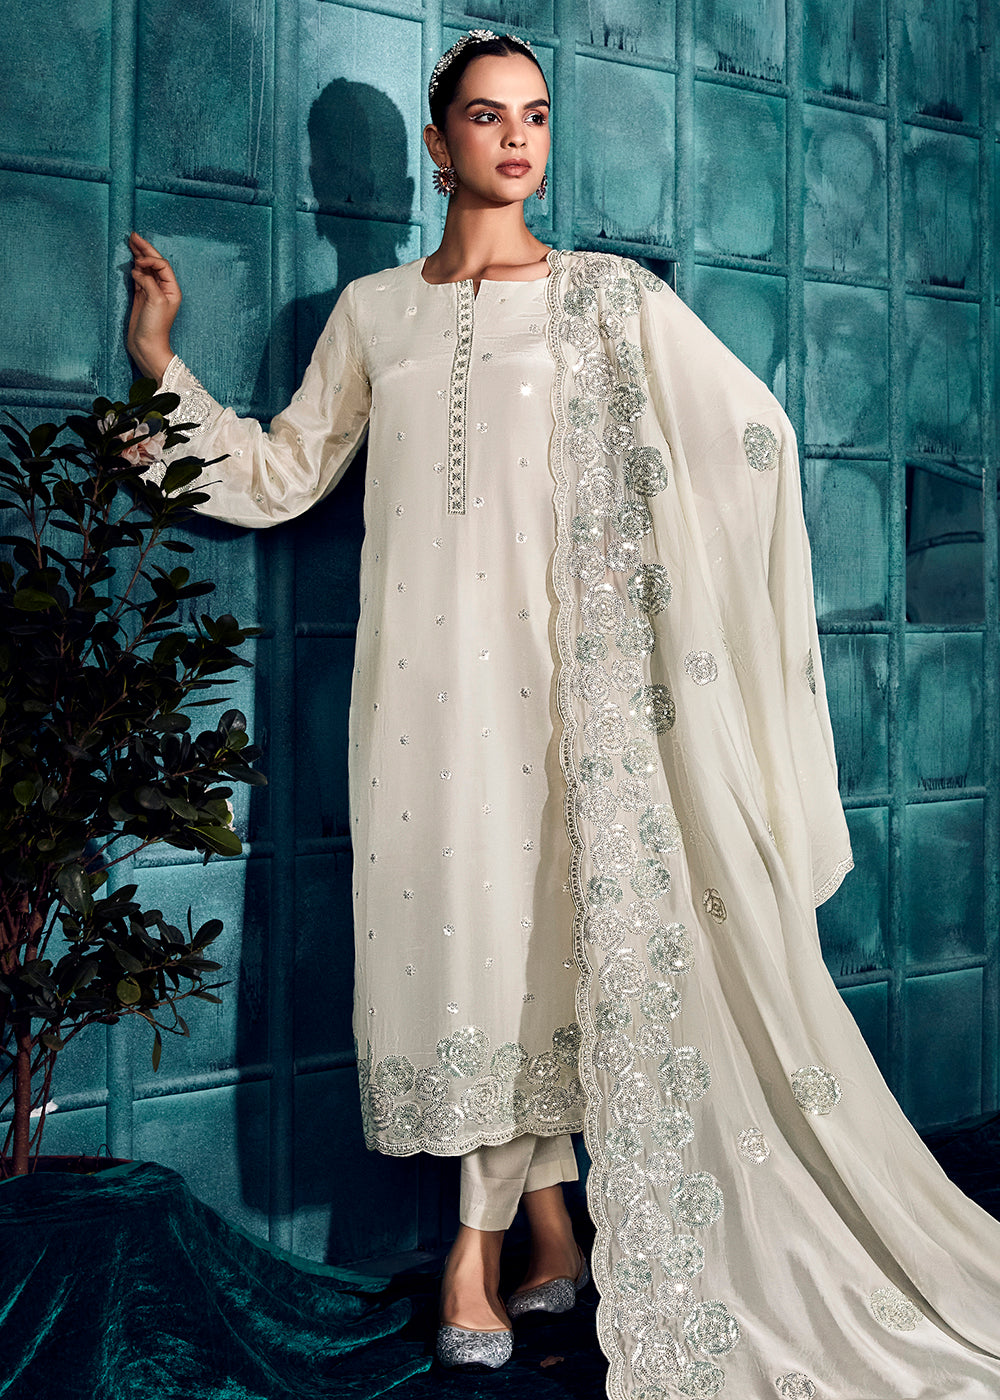 Buy Now Pearl White Modale Silk Embroidered Festive Salwar Suit Online in USA, UK, Canada, Germany, Australia & Worldwide at Empress Clothing.